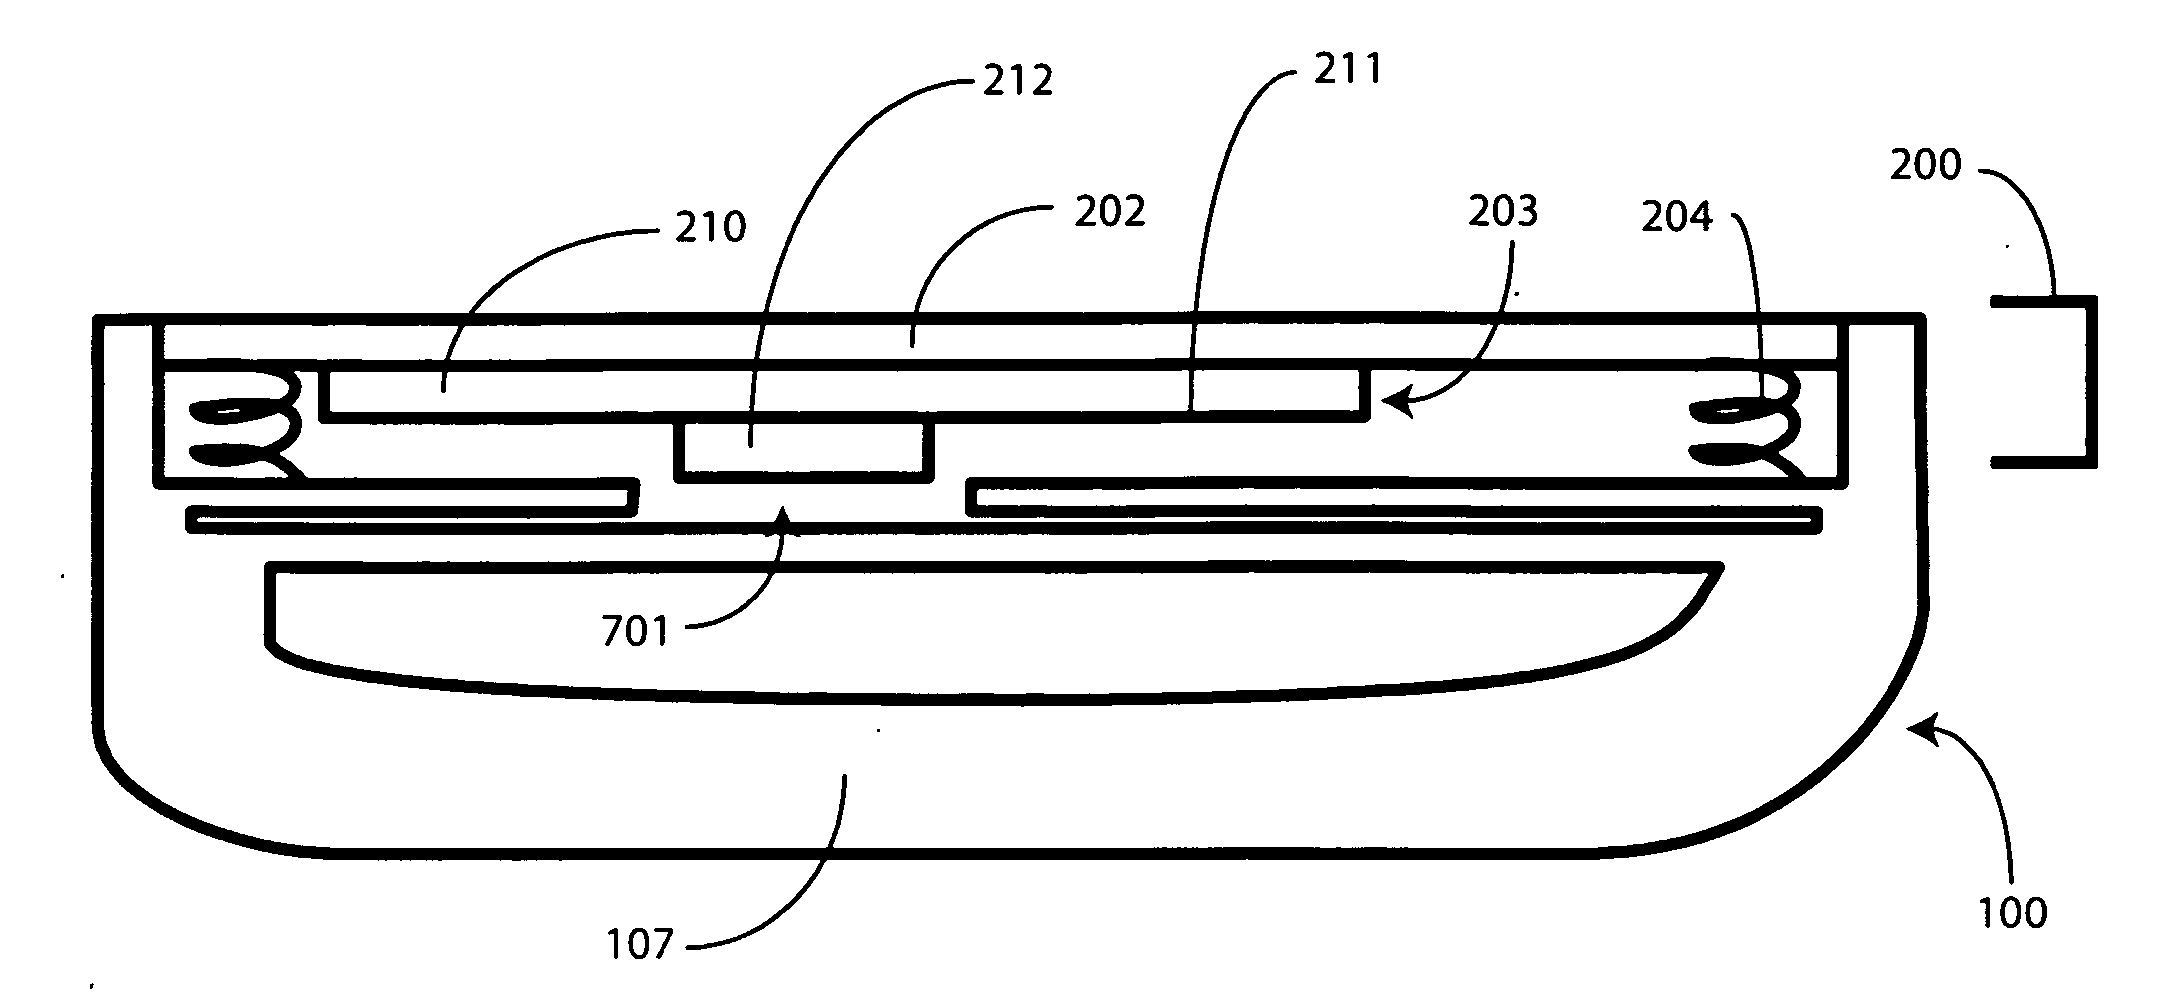 Electronic Device with Suspension Interface for Localized Haptic Response